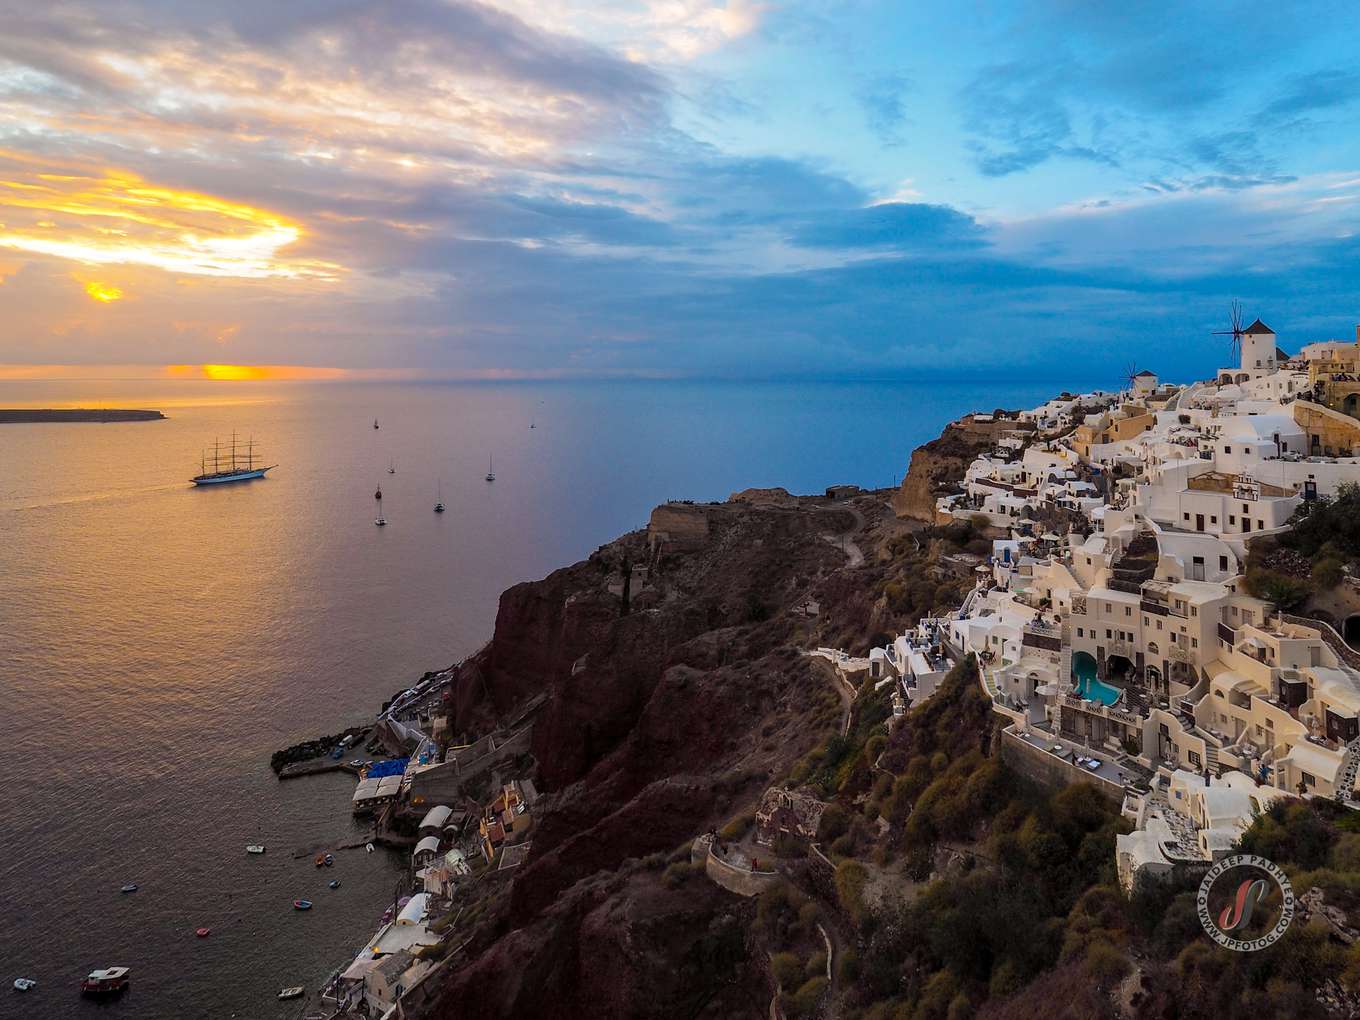 Surreal sunset at Oia